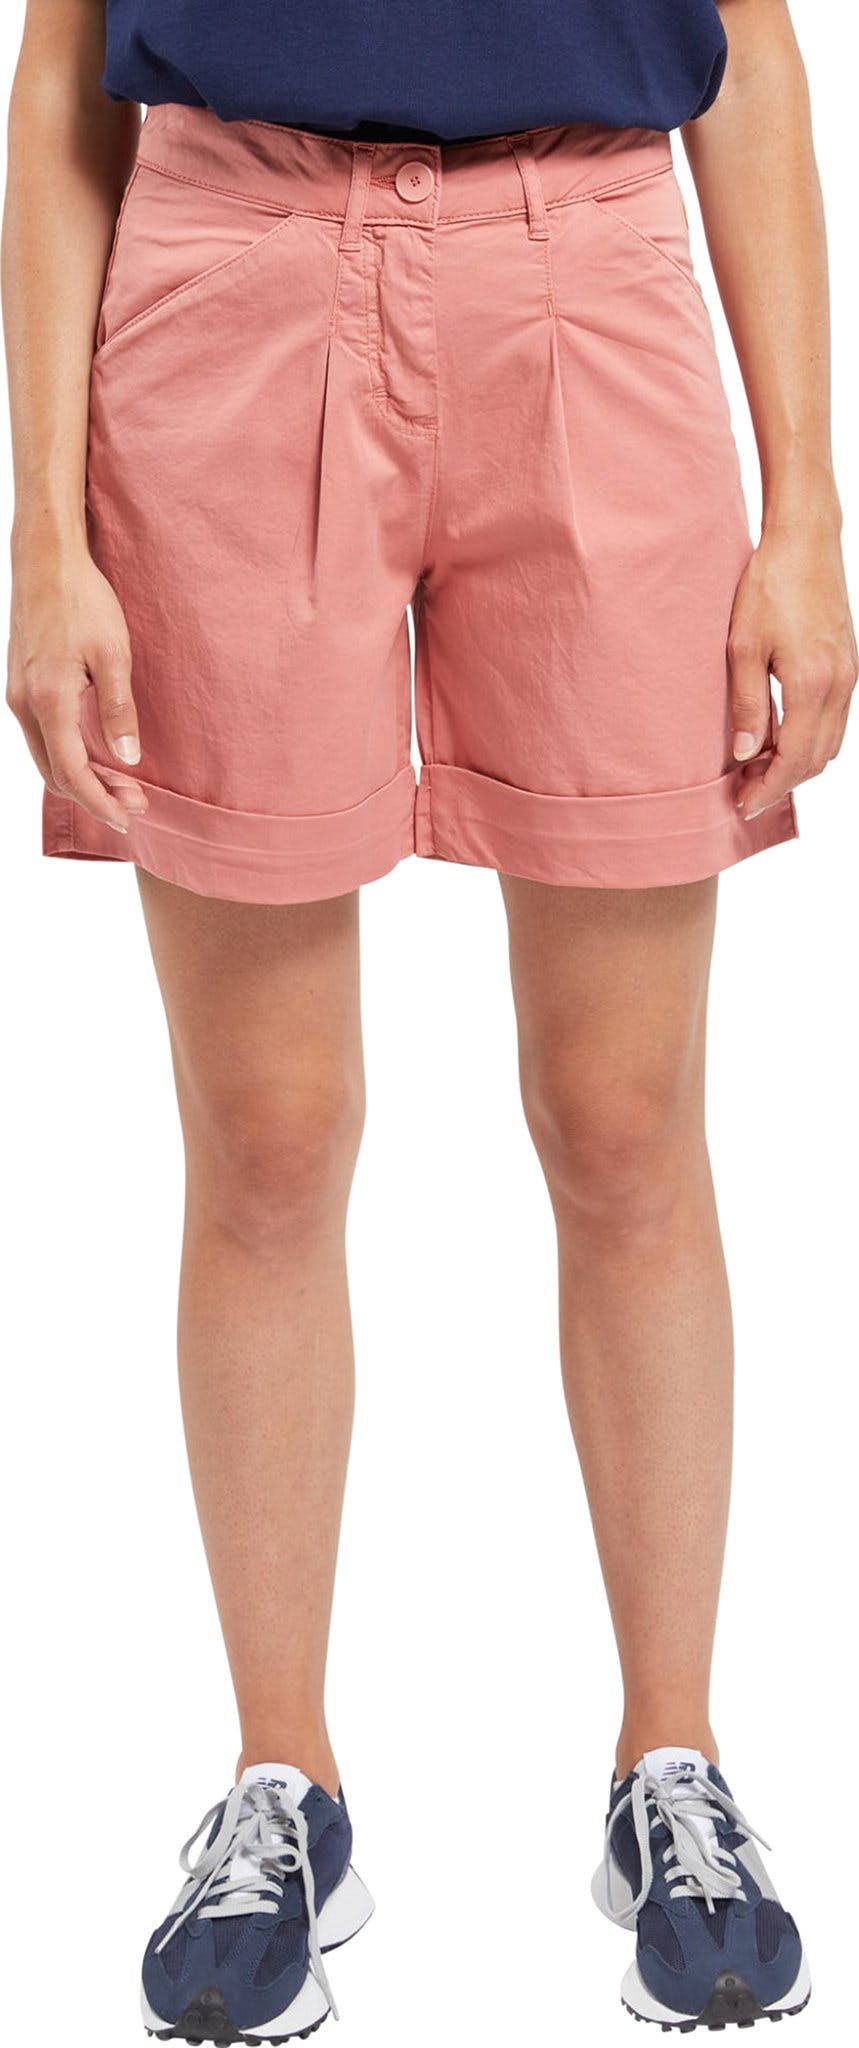 Product image for Cotton Cuffed Shorts - Women's